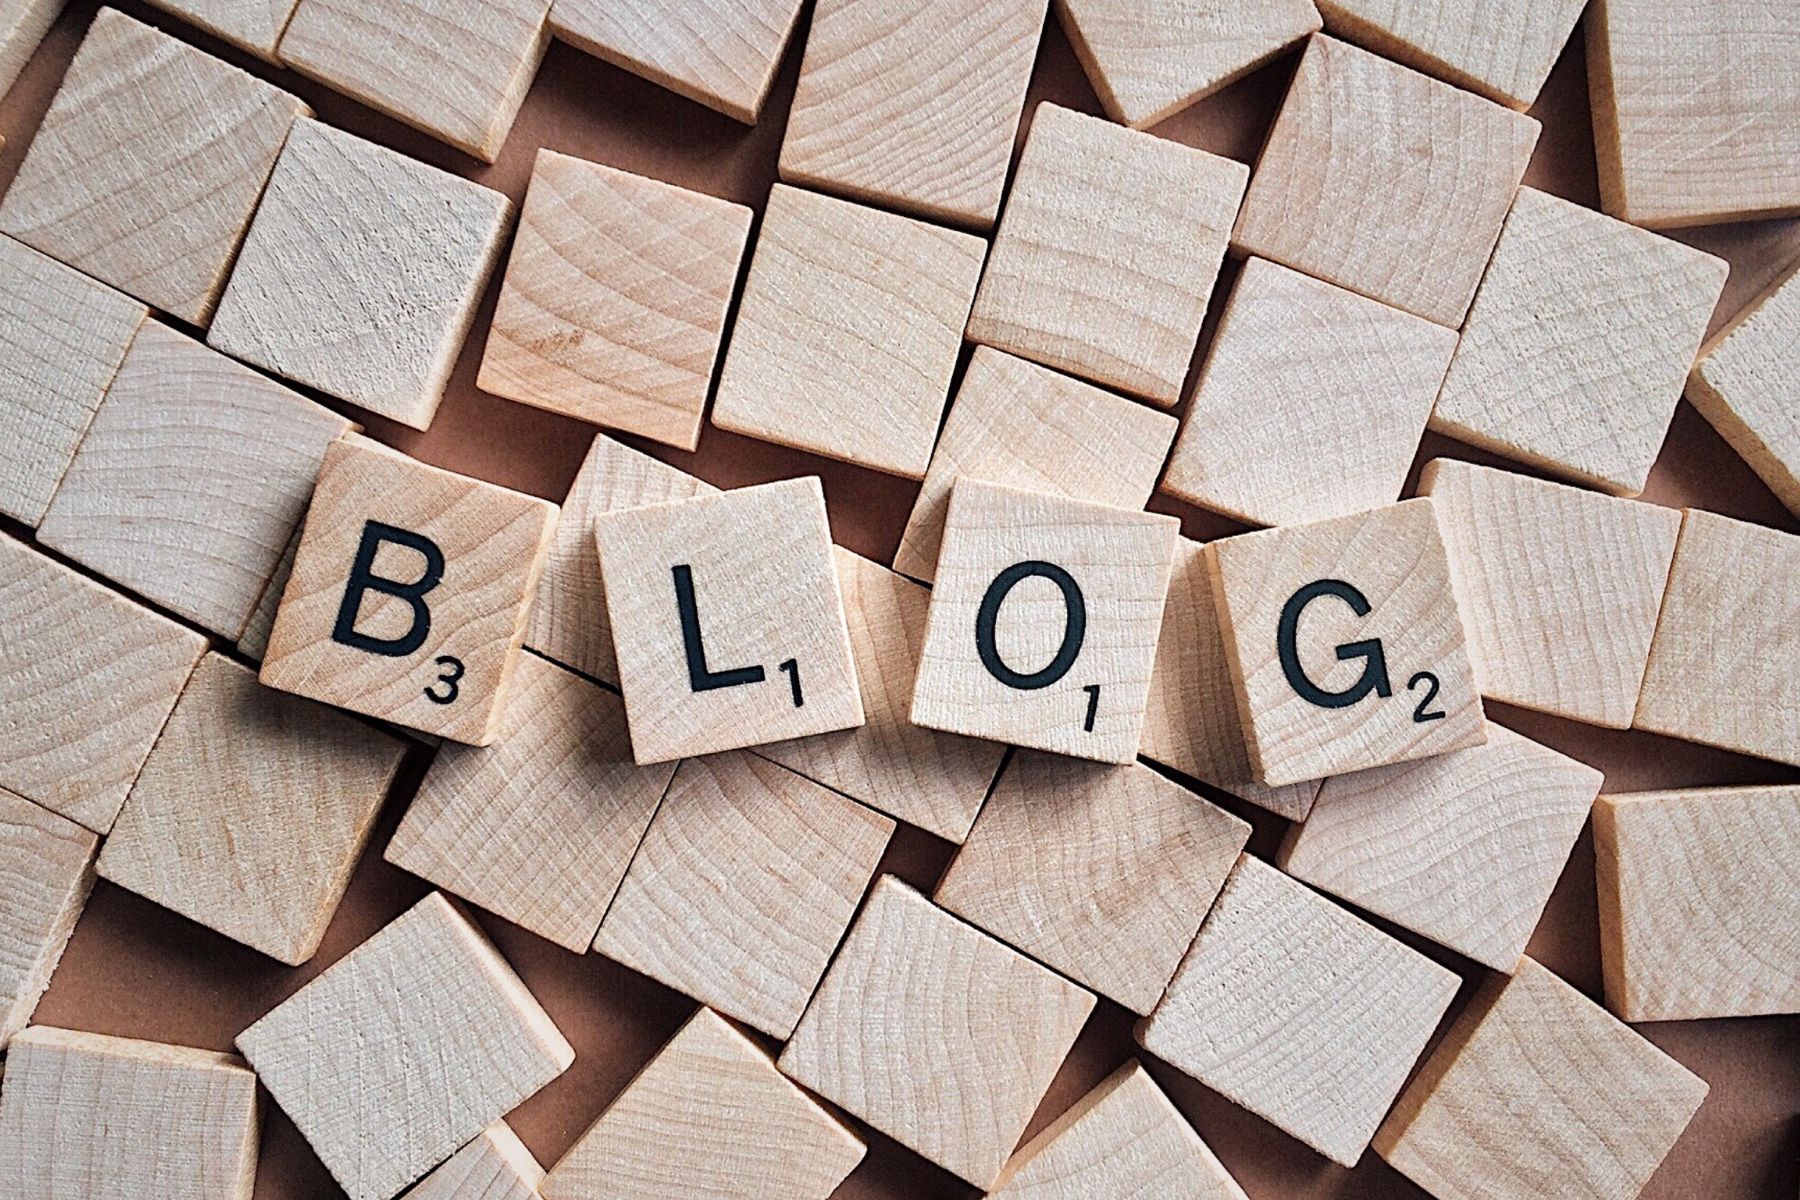 How to tell if your veterinary practice blog is being read